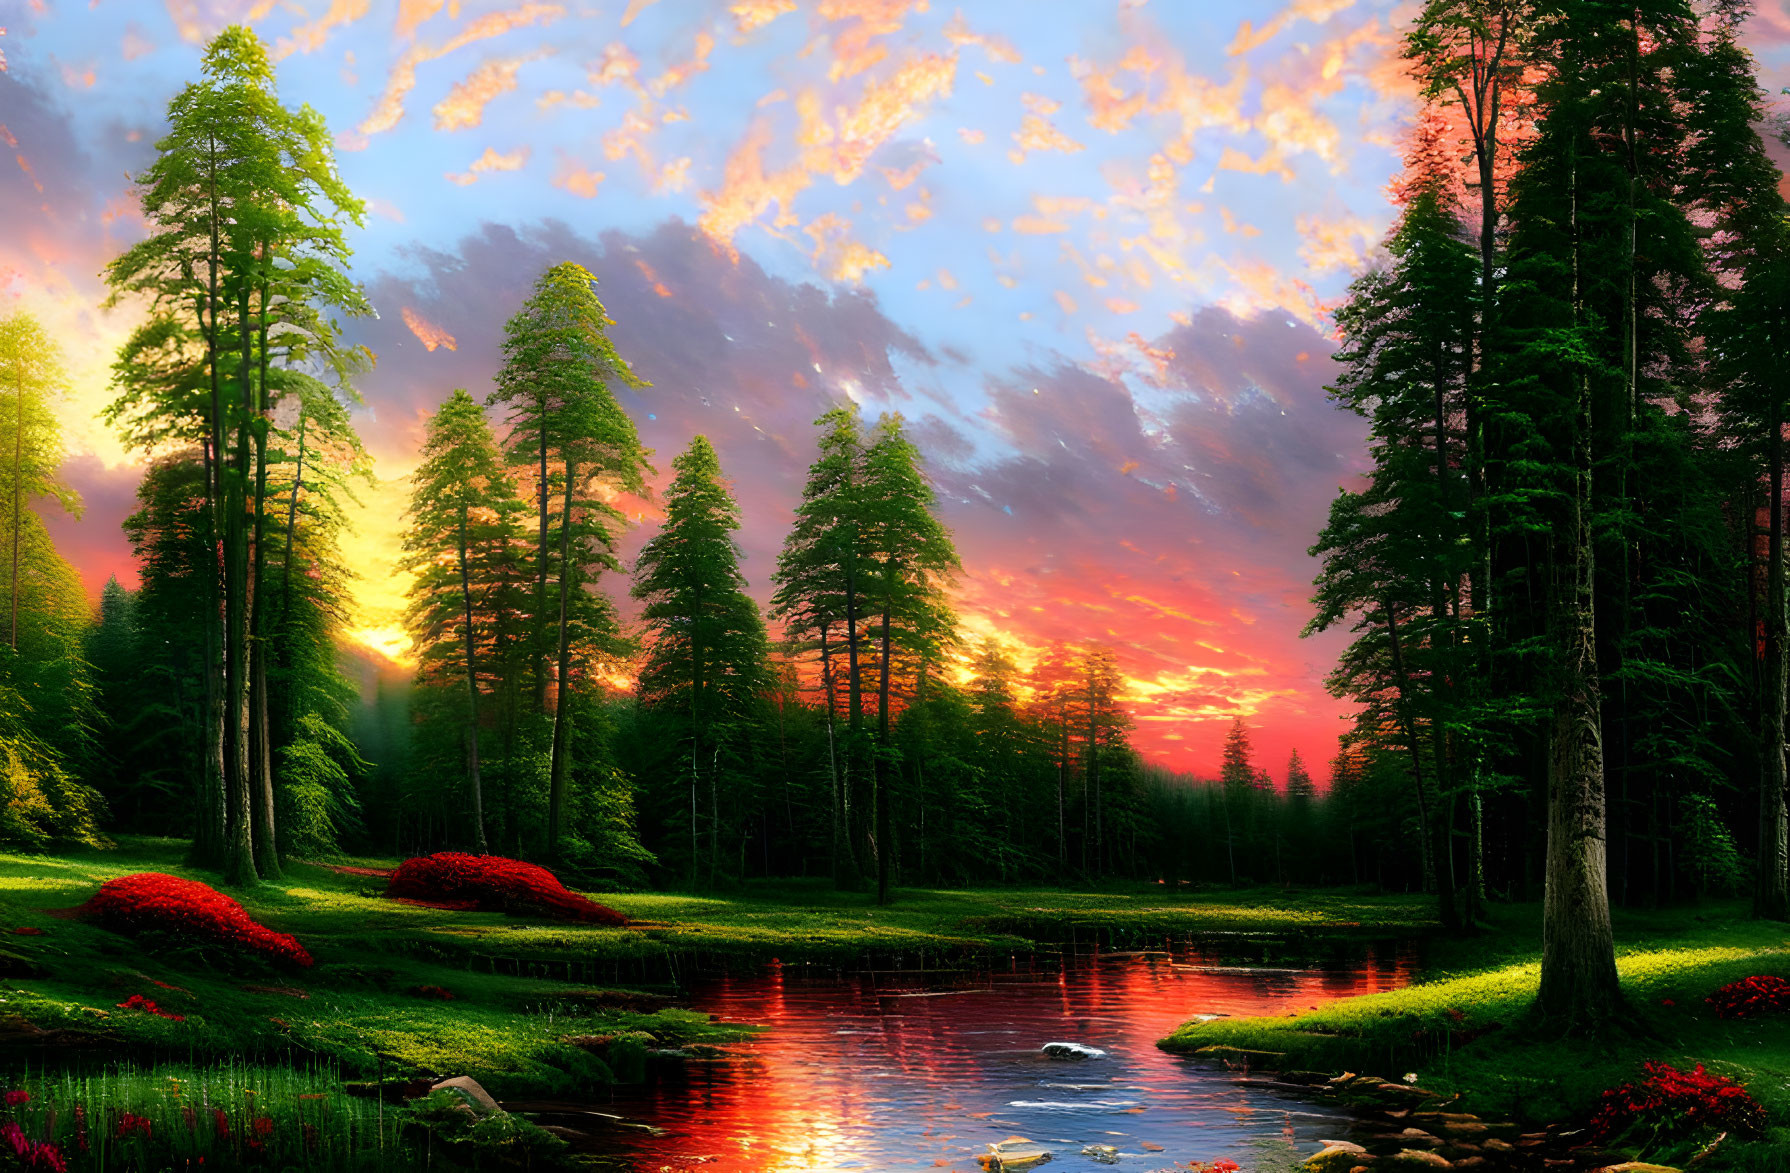 Tranquil forest sunset with tall trees, stream, red flowers, orange-pink sky